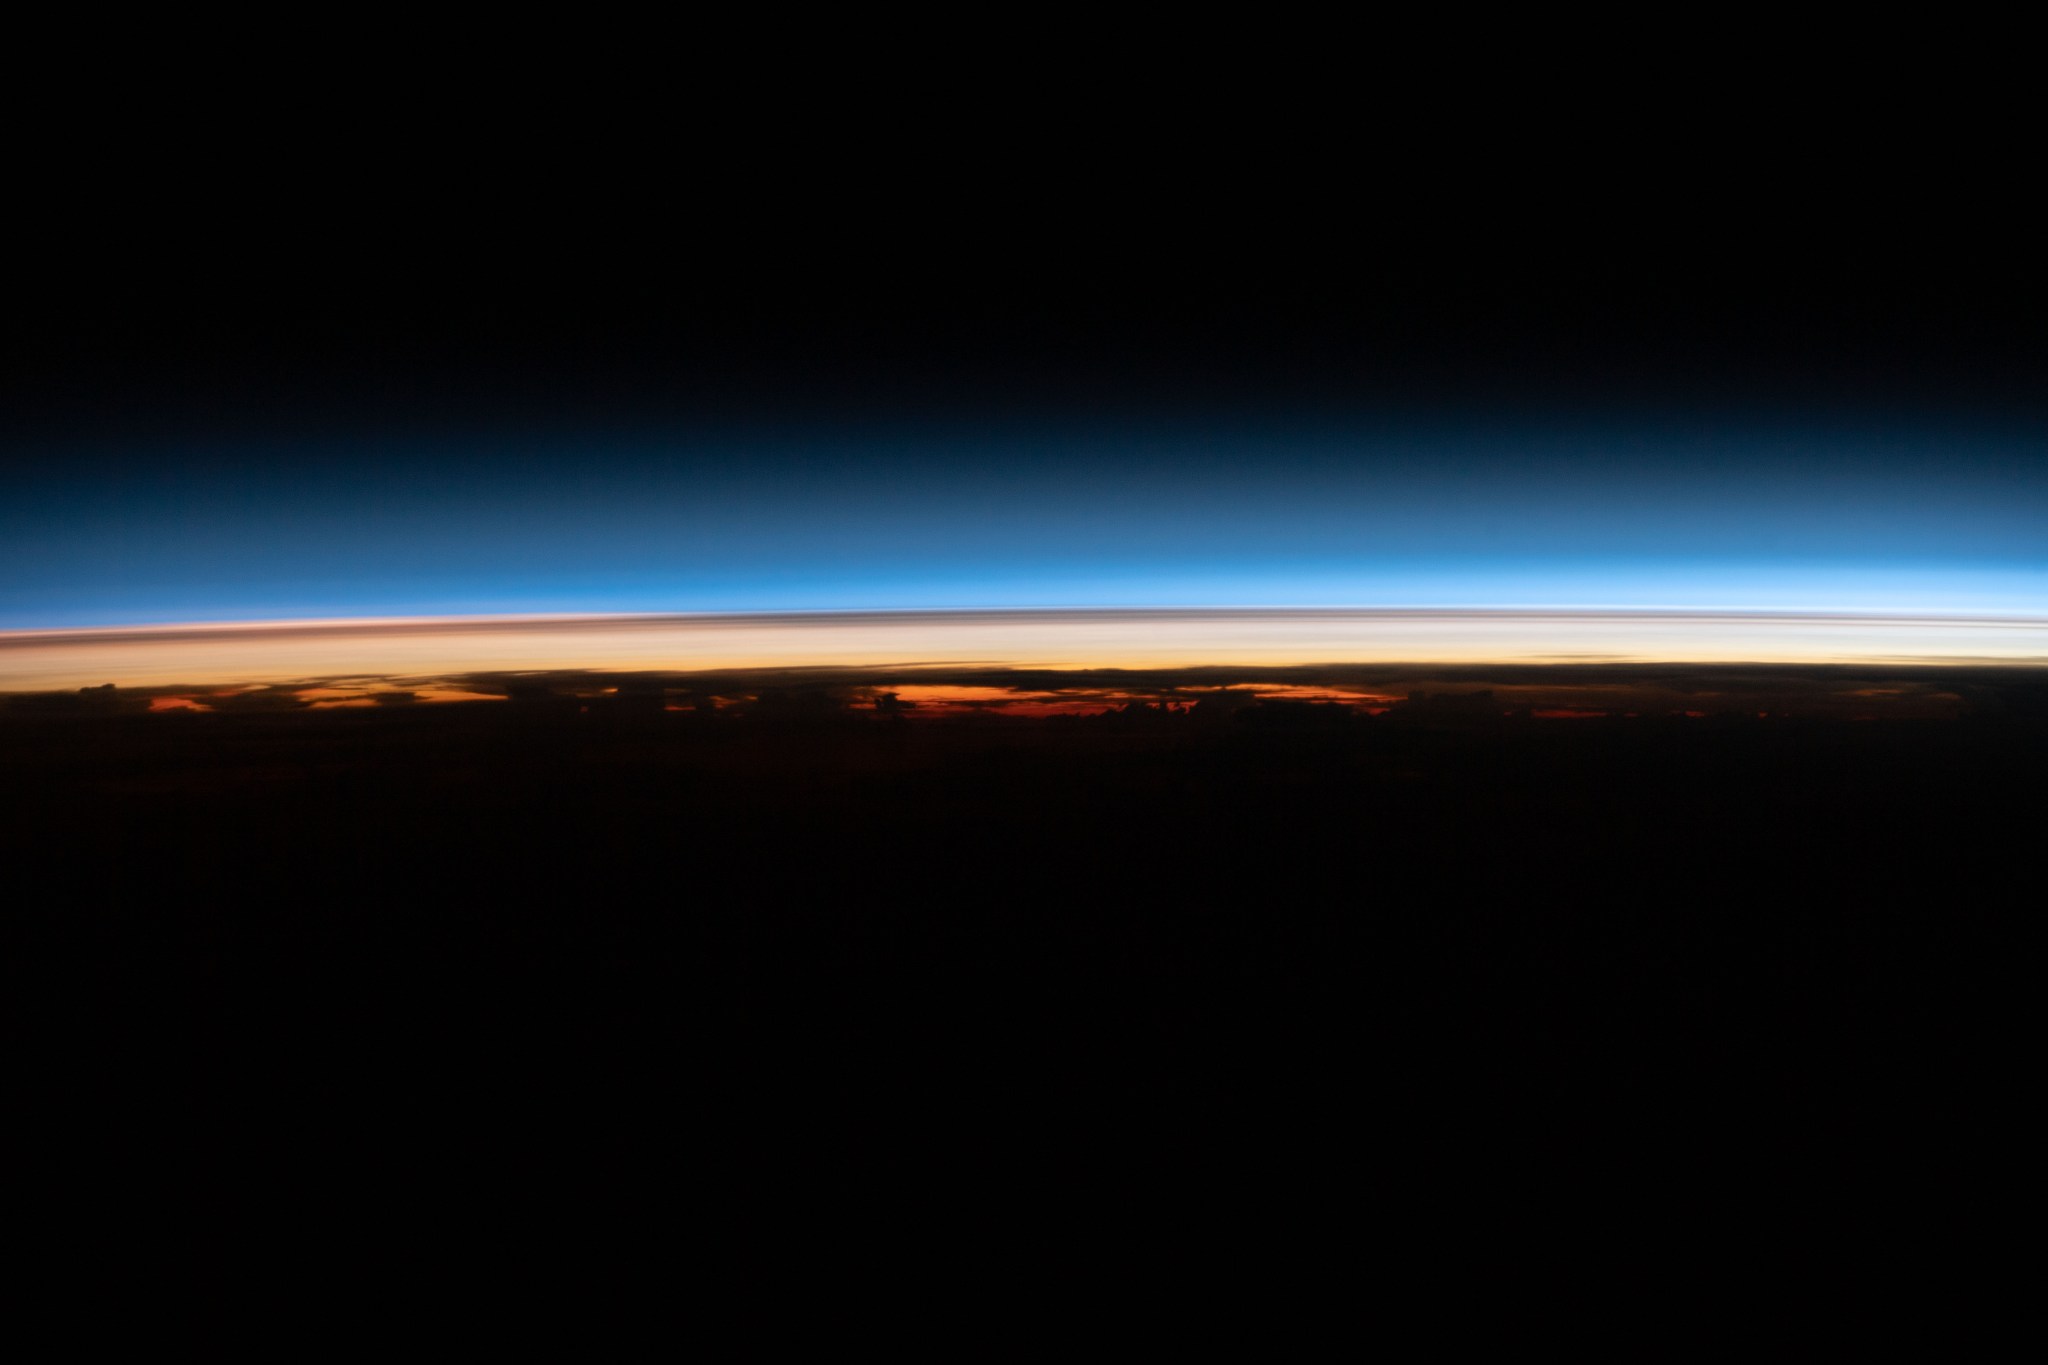 image of a thin blue line over a thin orange line resembling Earth's limb and stratosphere